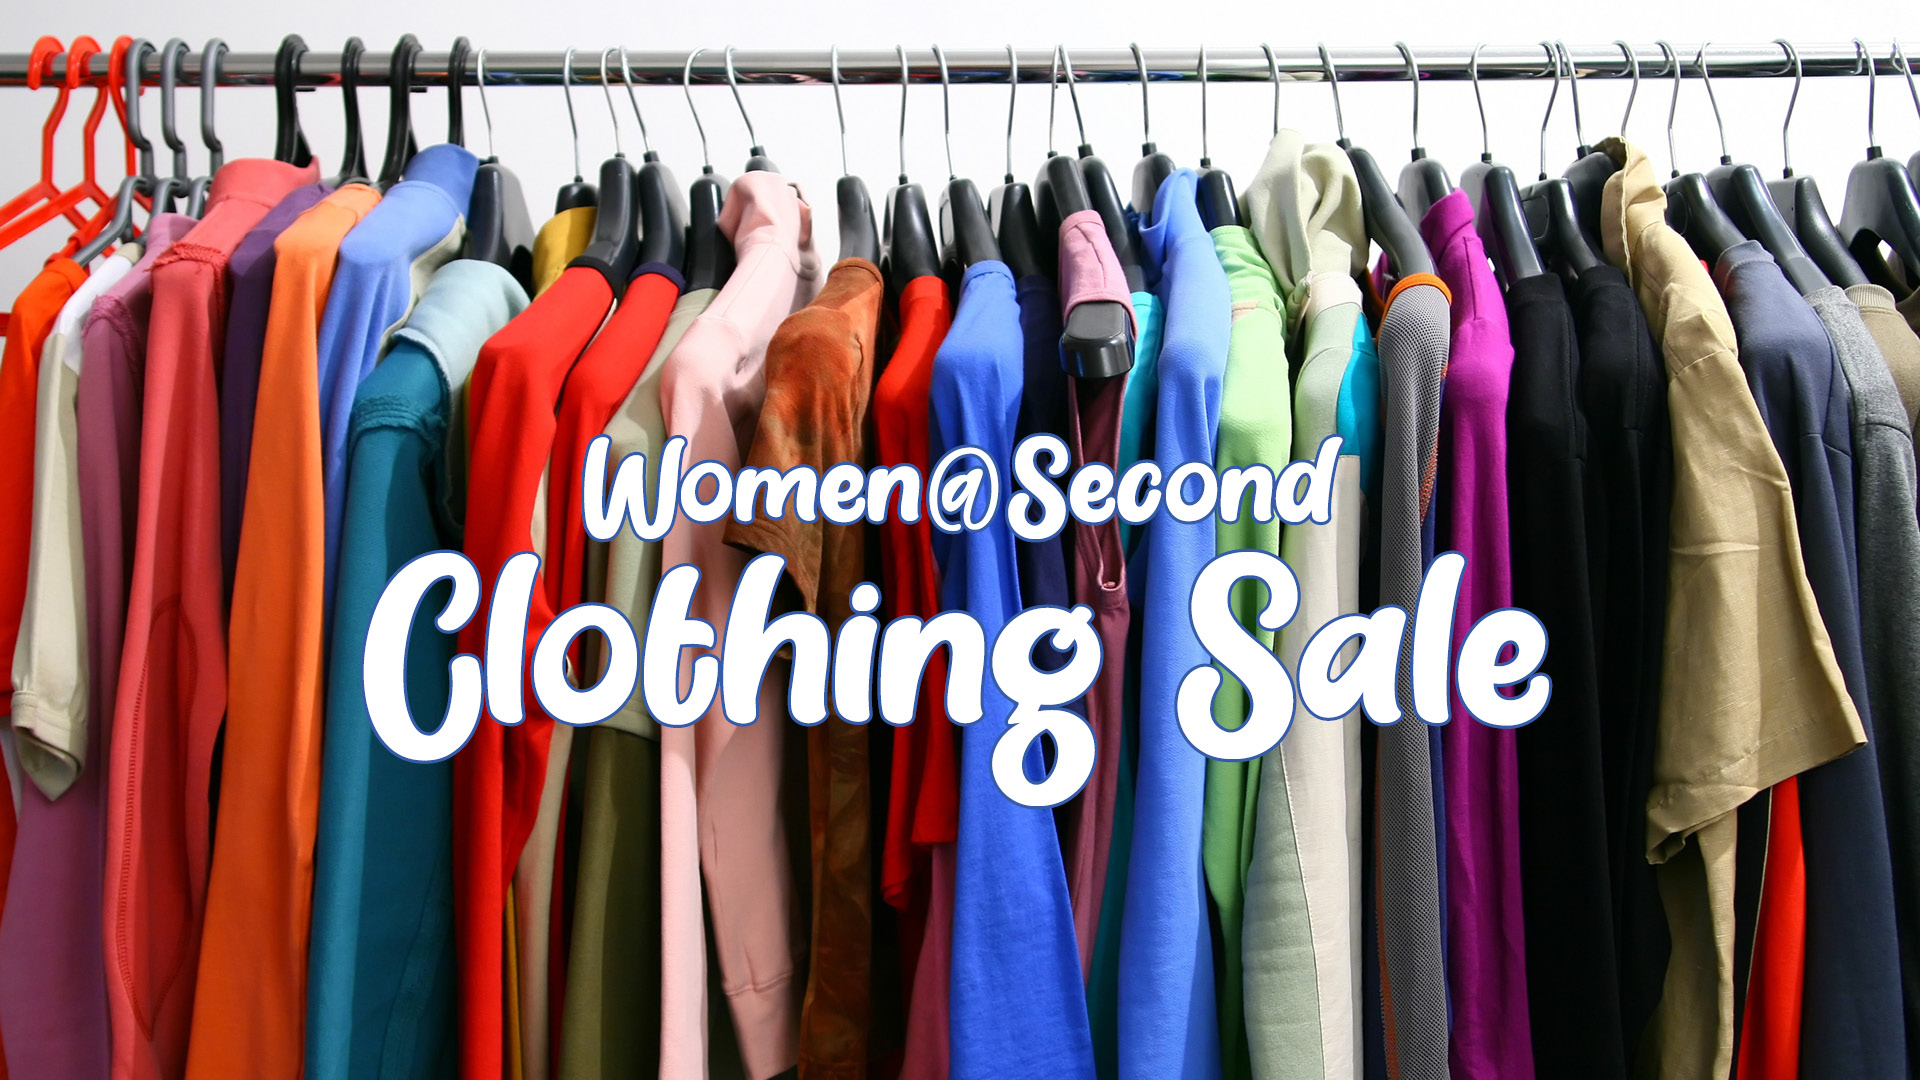 Girls & Women's Clothing Clearance